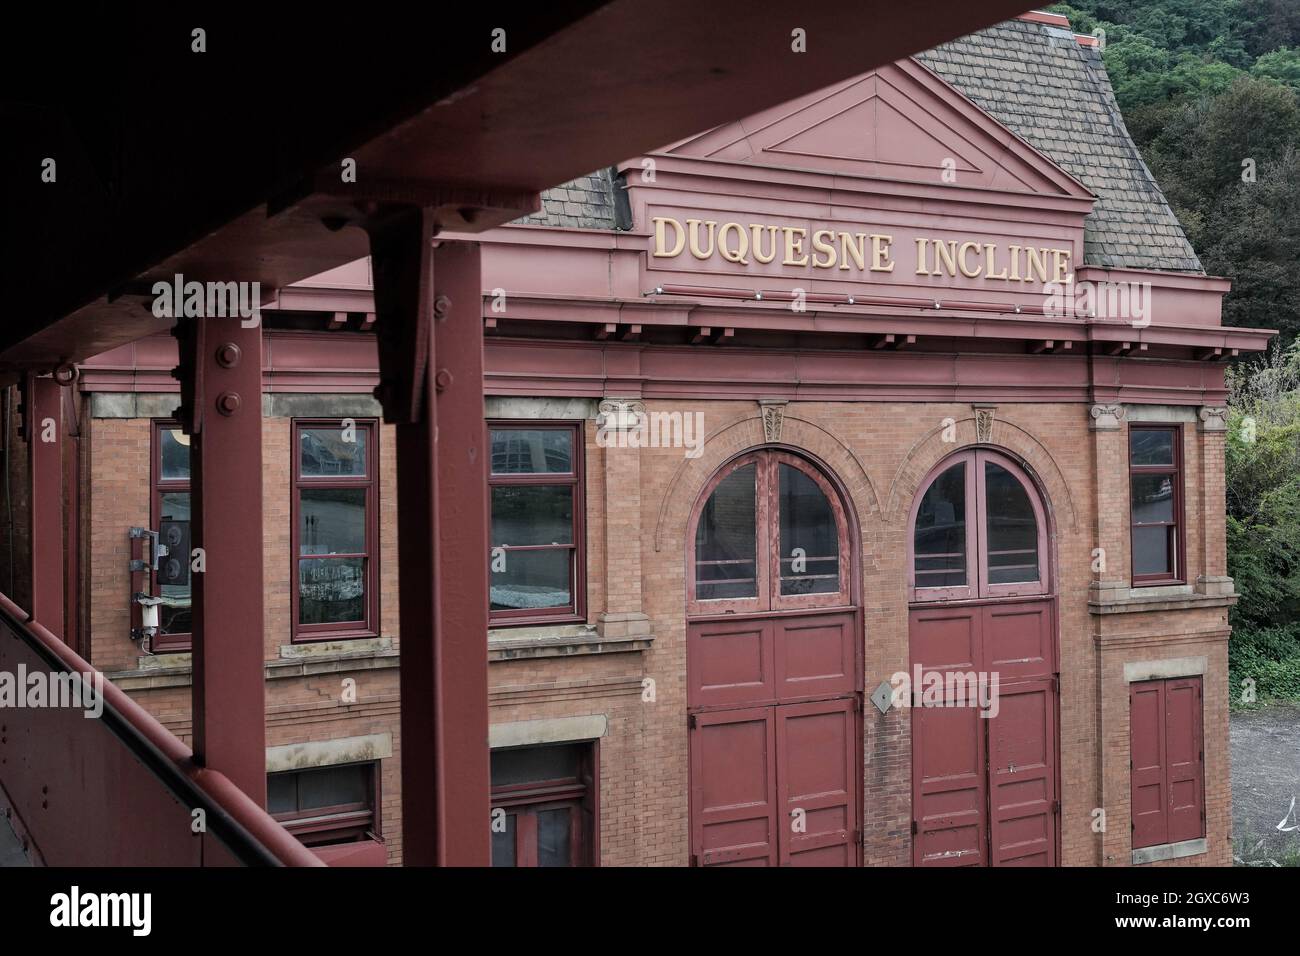 The Duquesne Incline Stock Photo